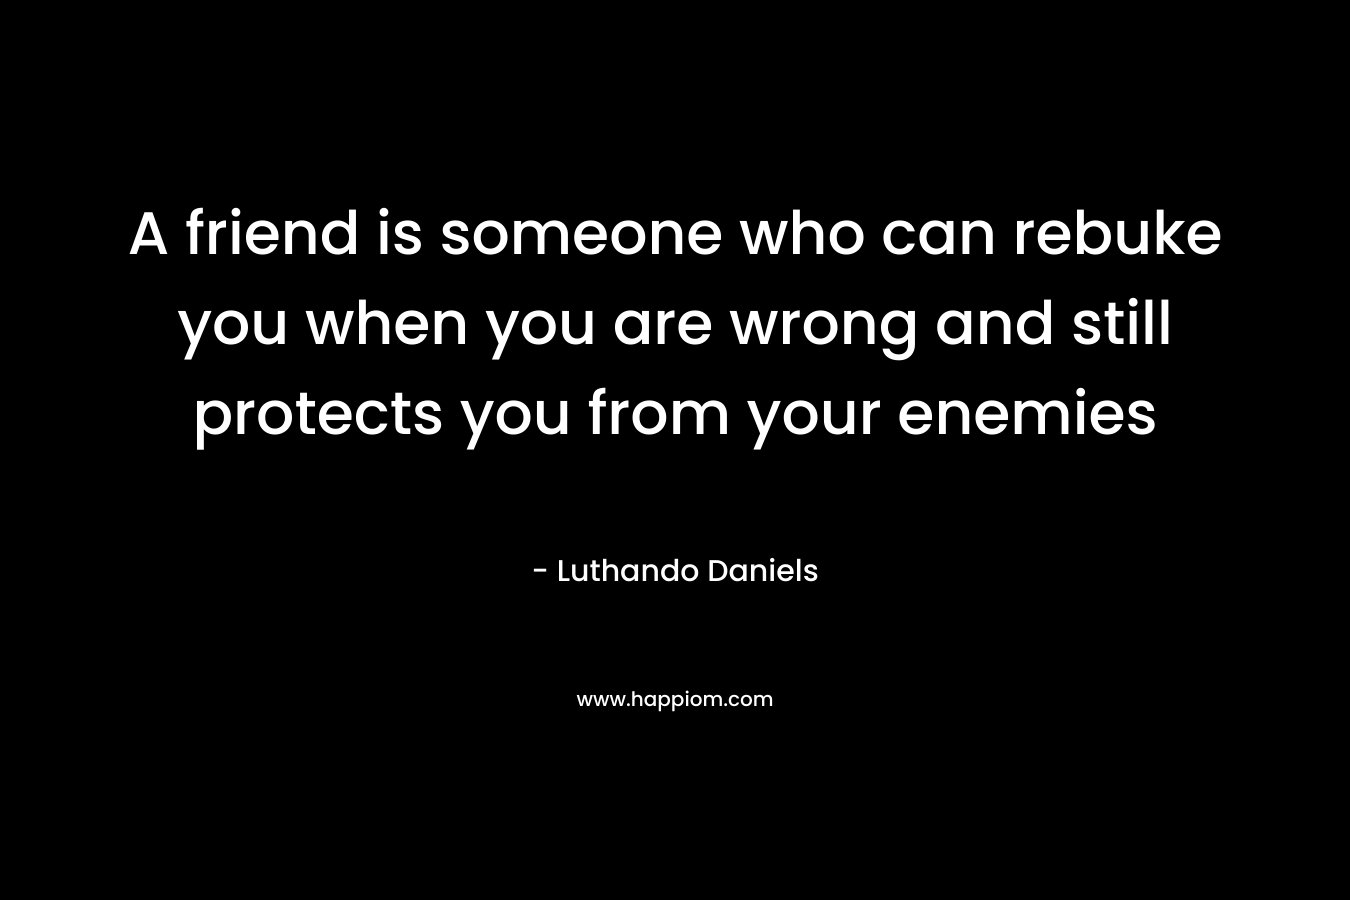 A friend is someone who can rebuke you when you are wrong and still protects you from your enemies – Luthando Daniels